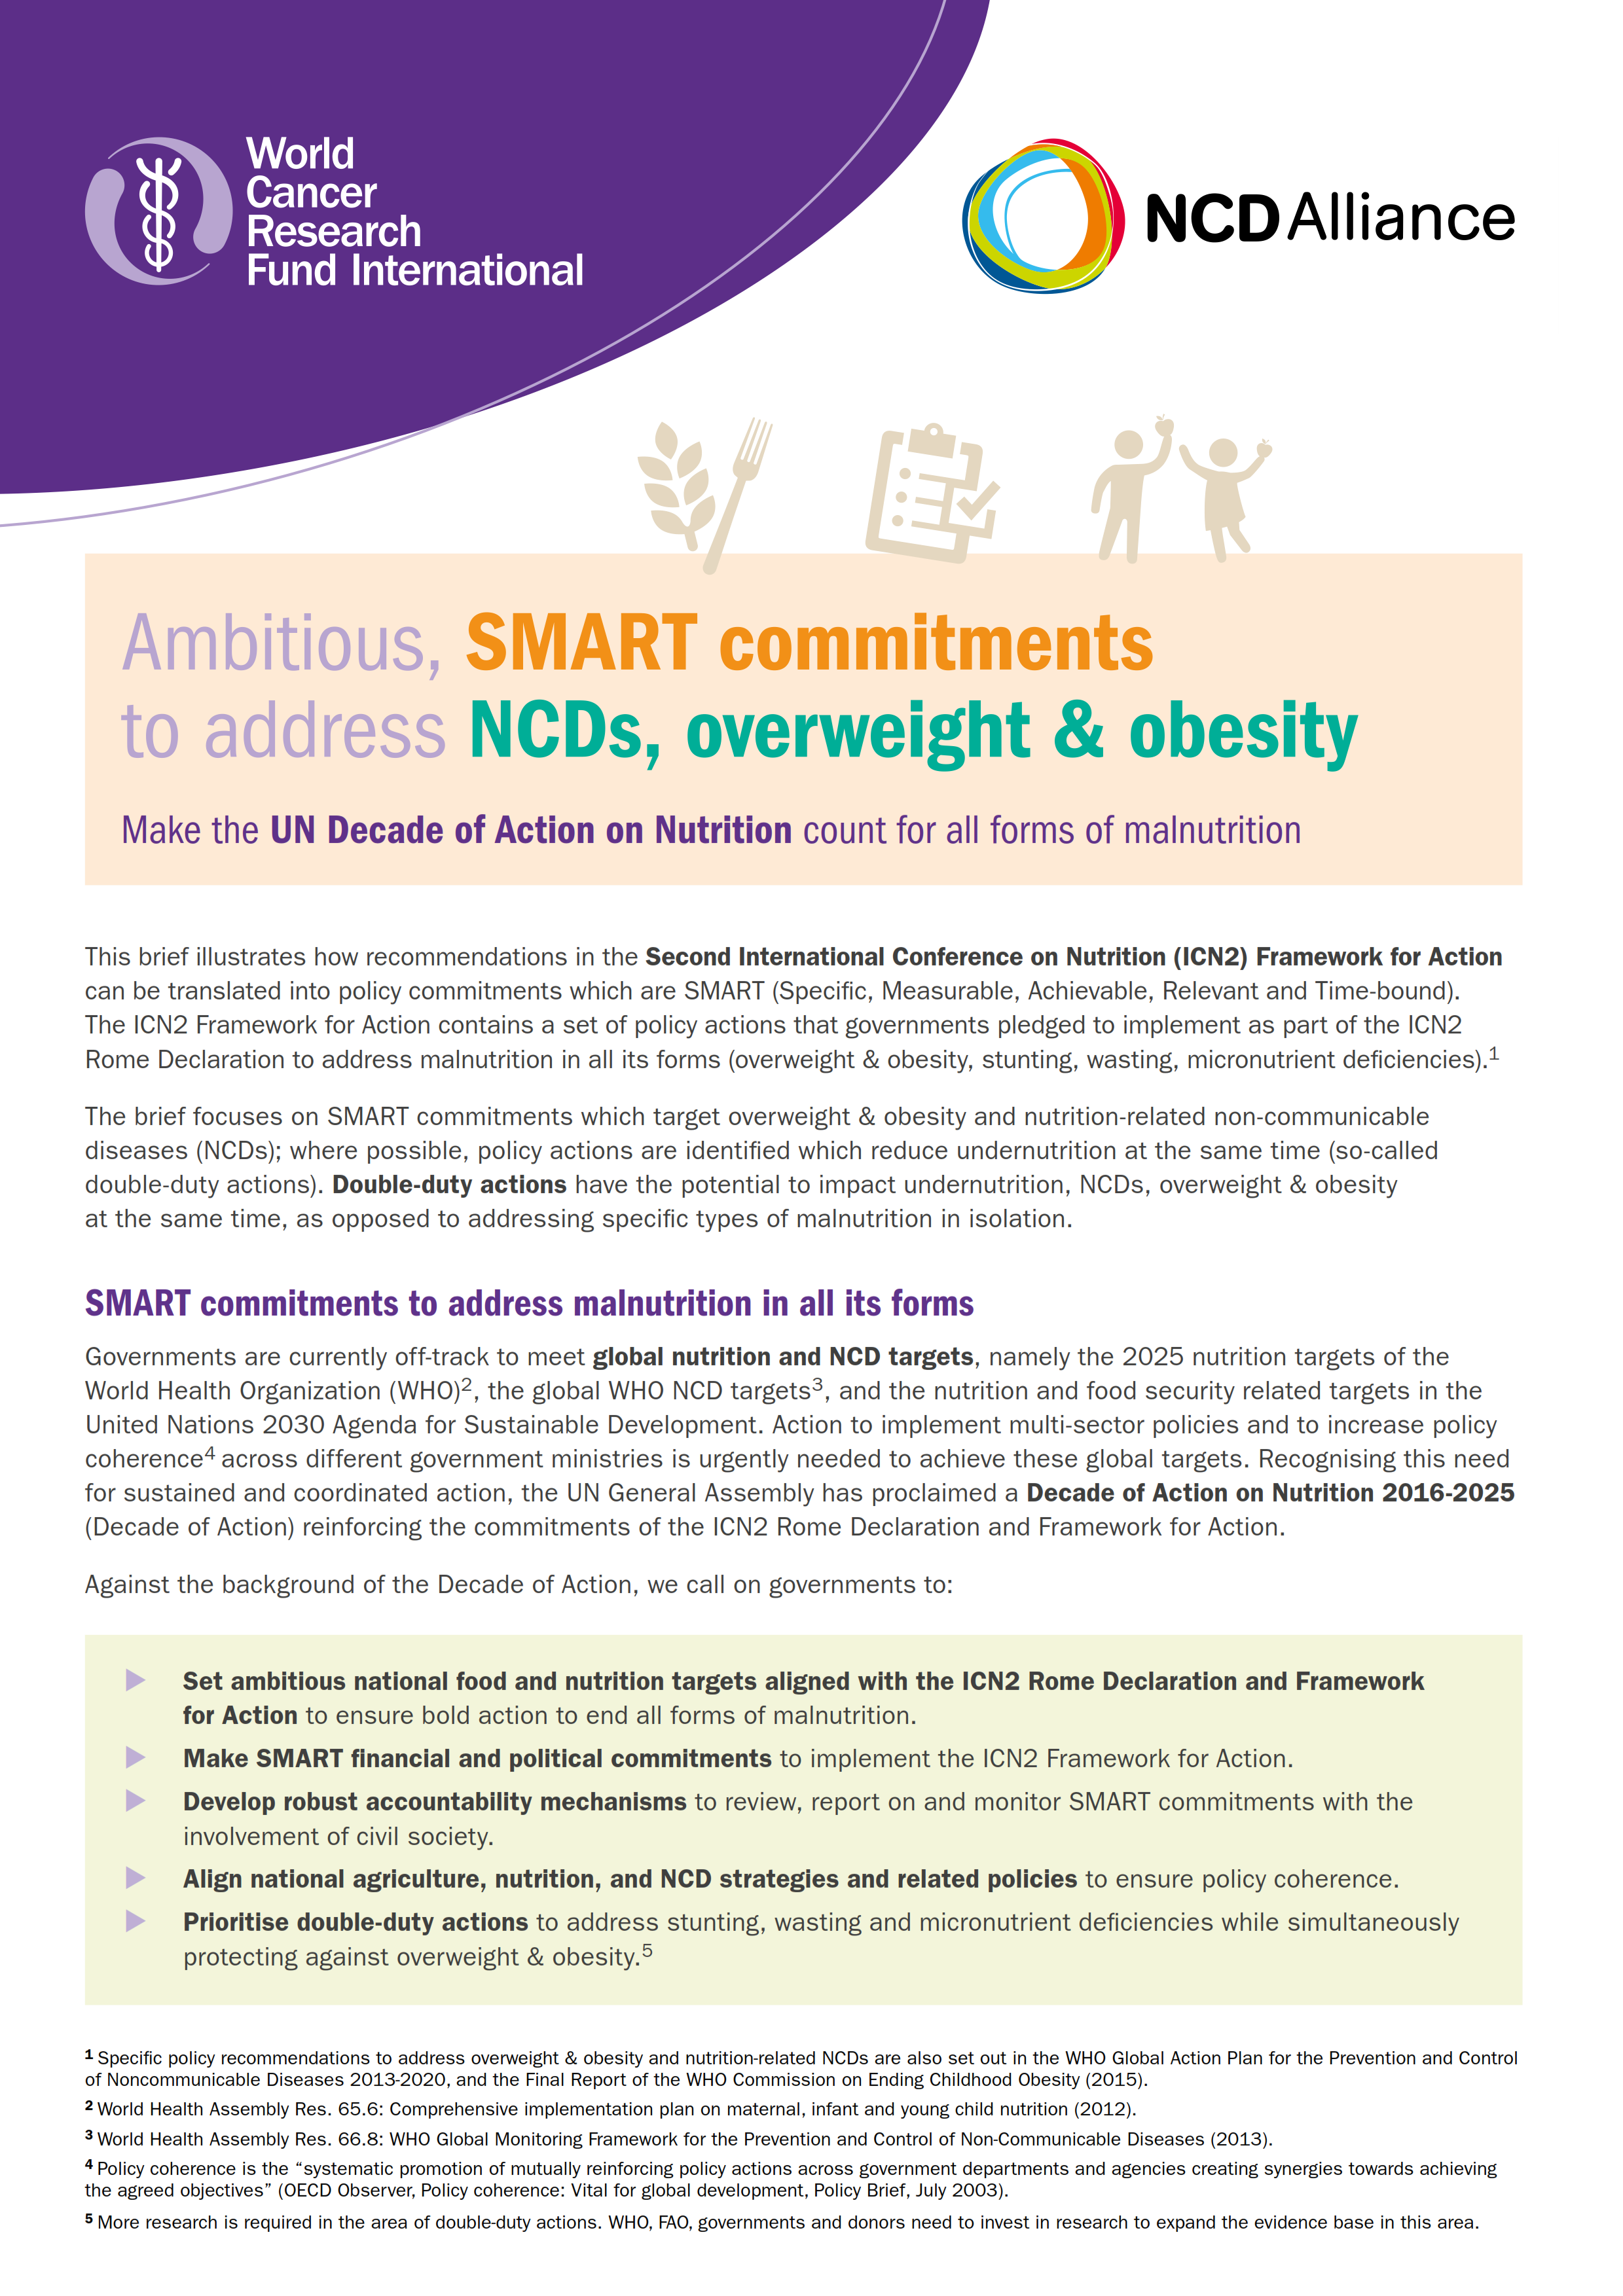 Guidance on developing SMART commitments to address NCDs, overweight and obesity